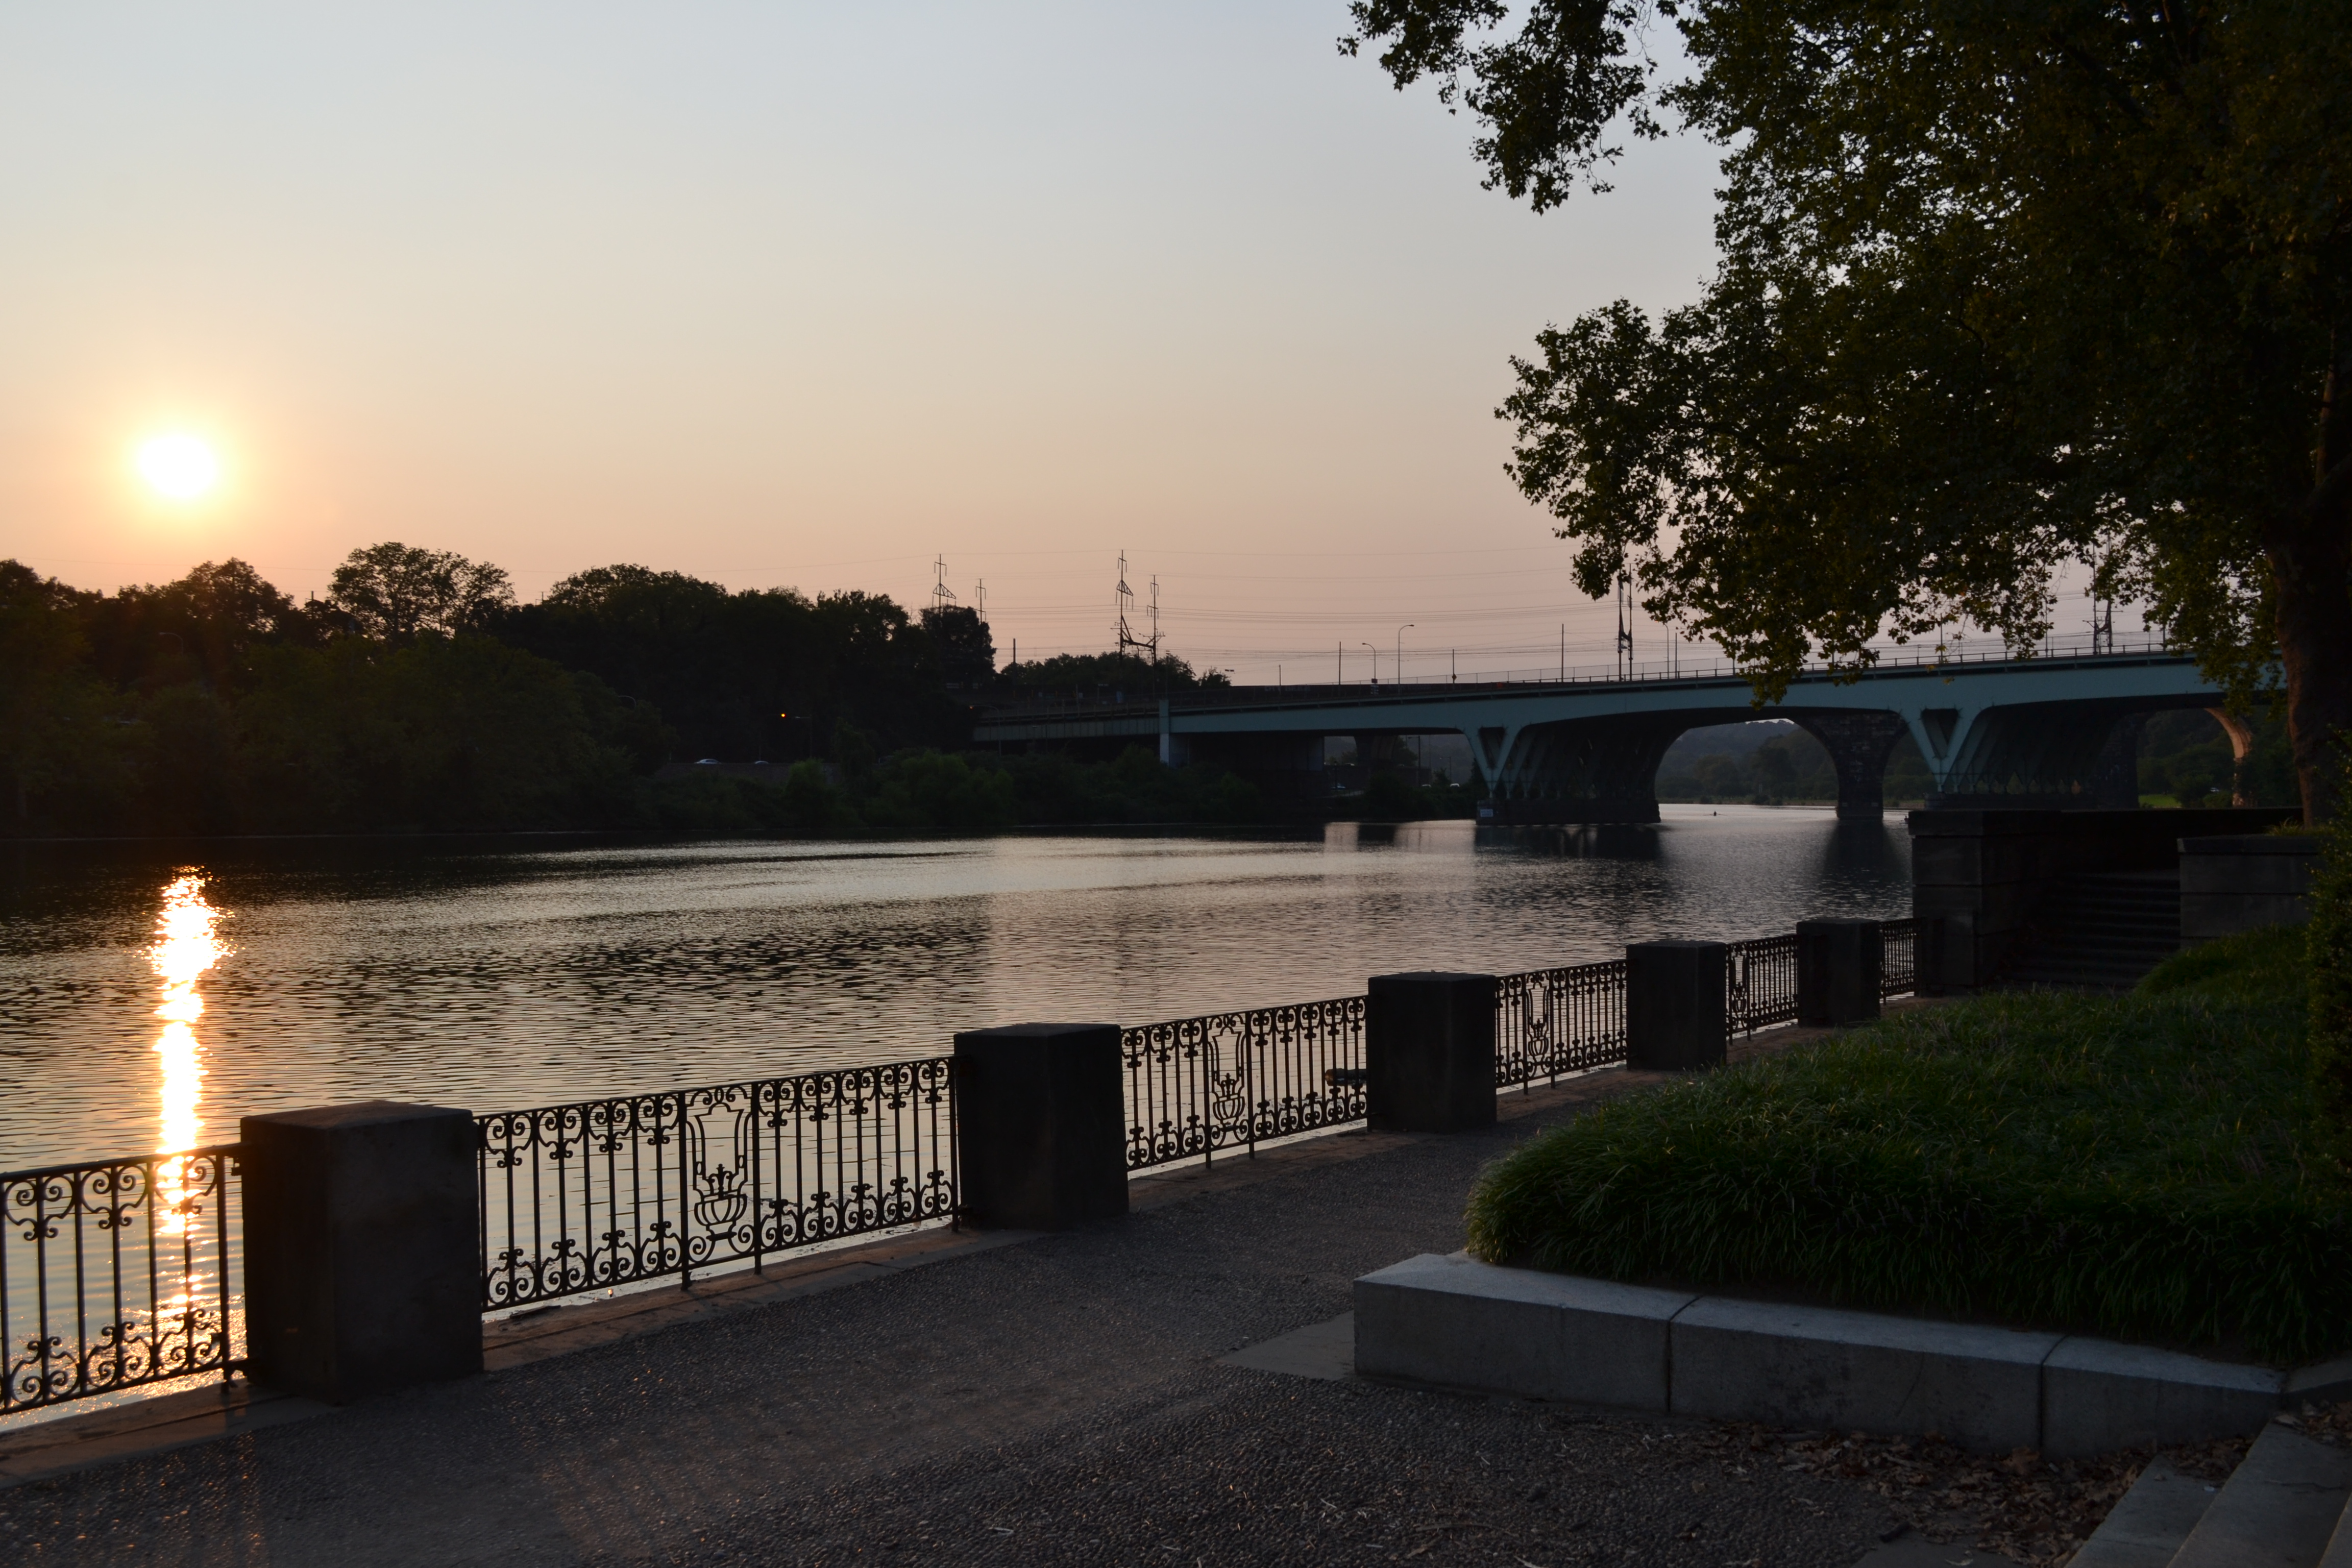 The tour wrapped up just as the sun was setting over the Schuylkill's western bank